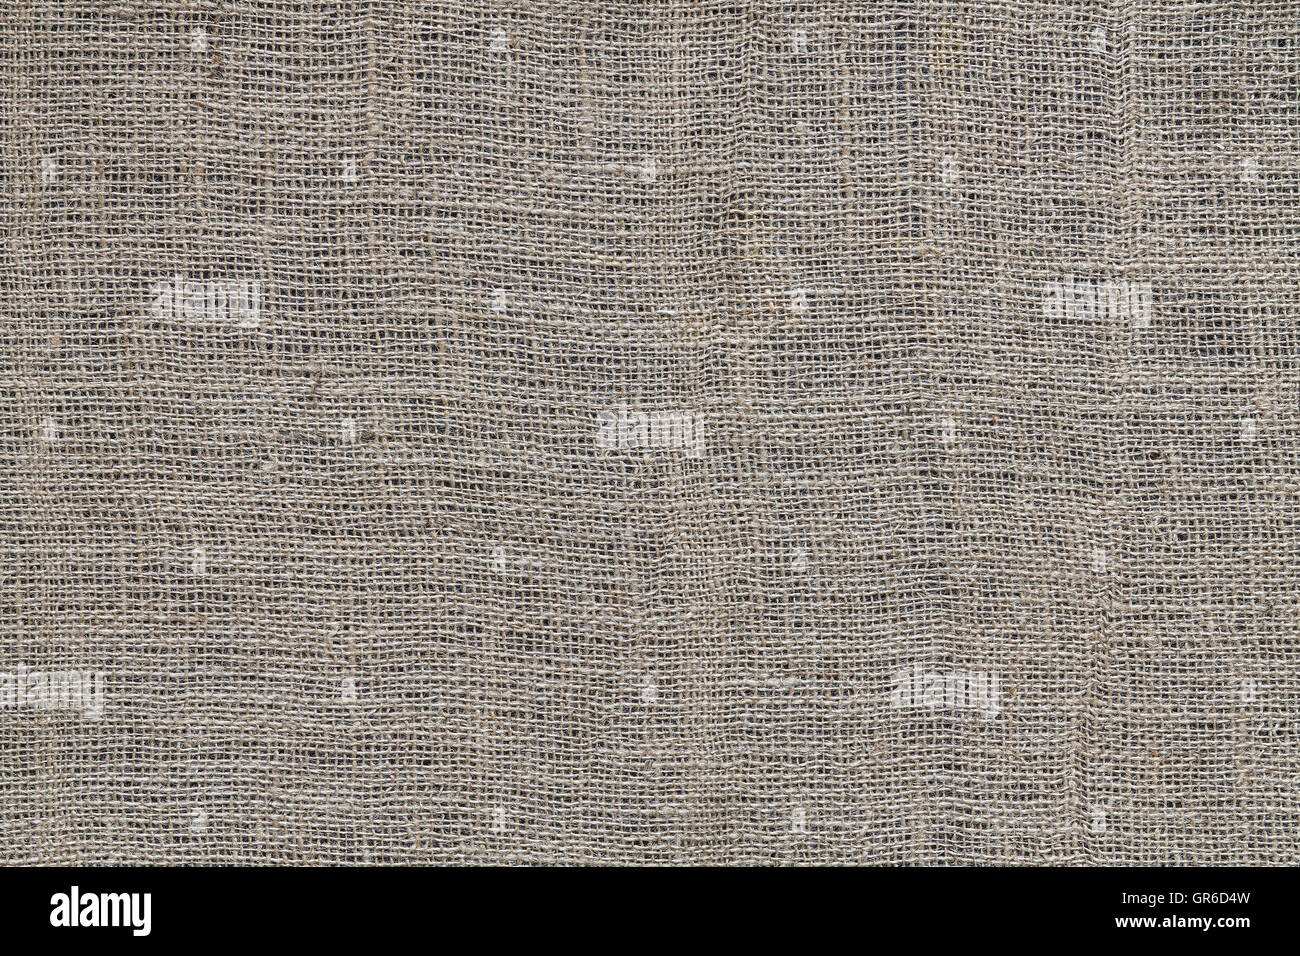 Natural linen texture or background. Stock Photo